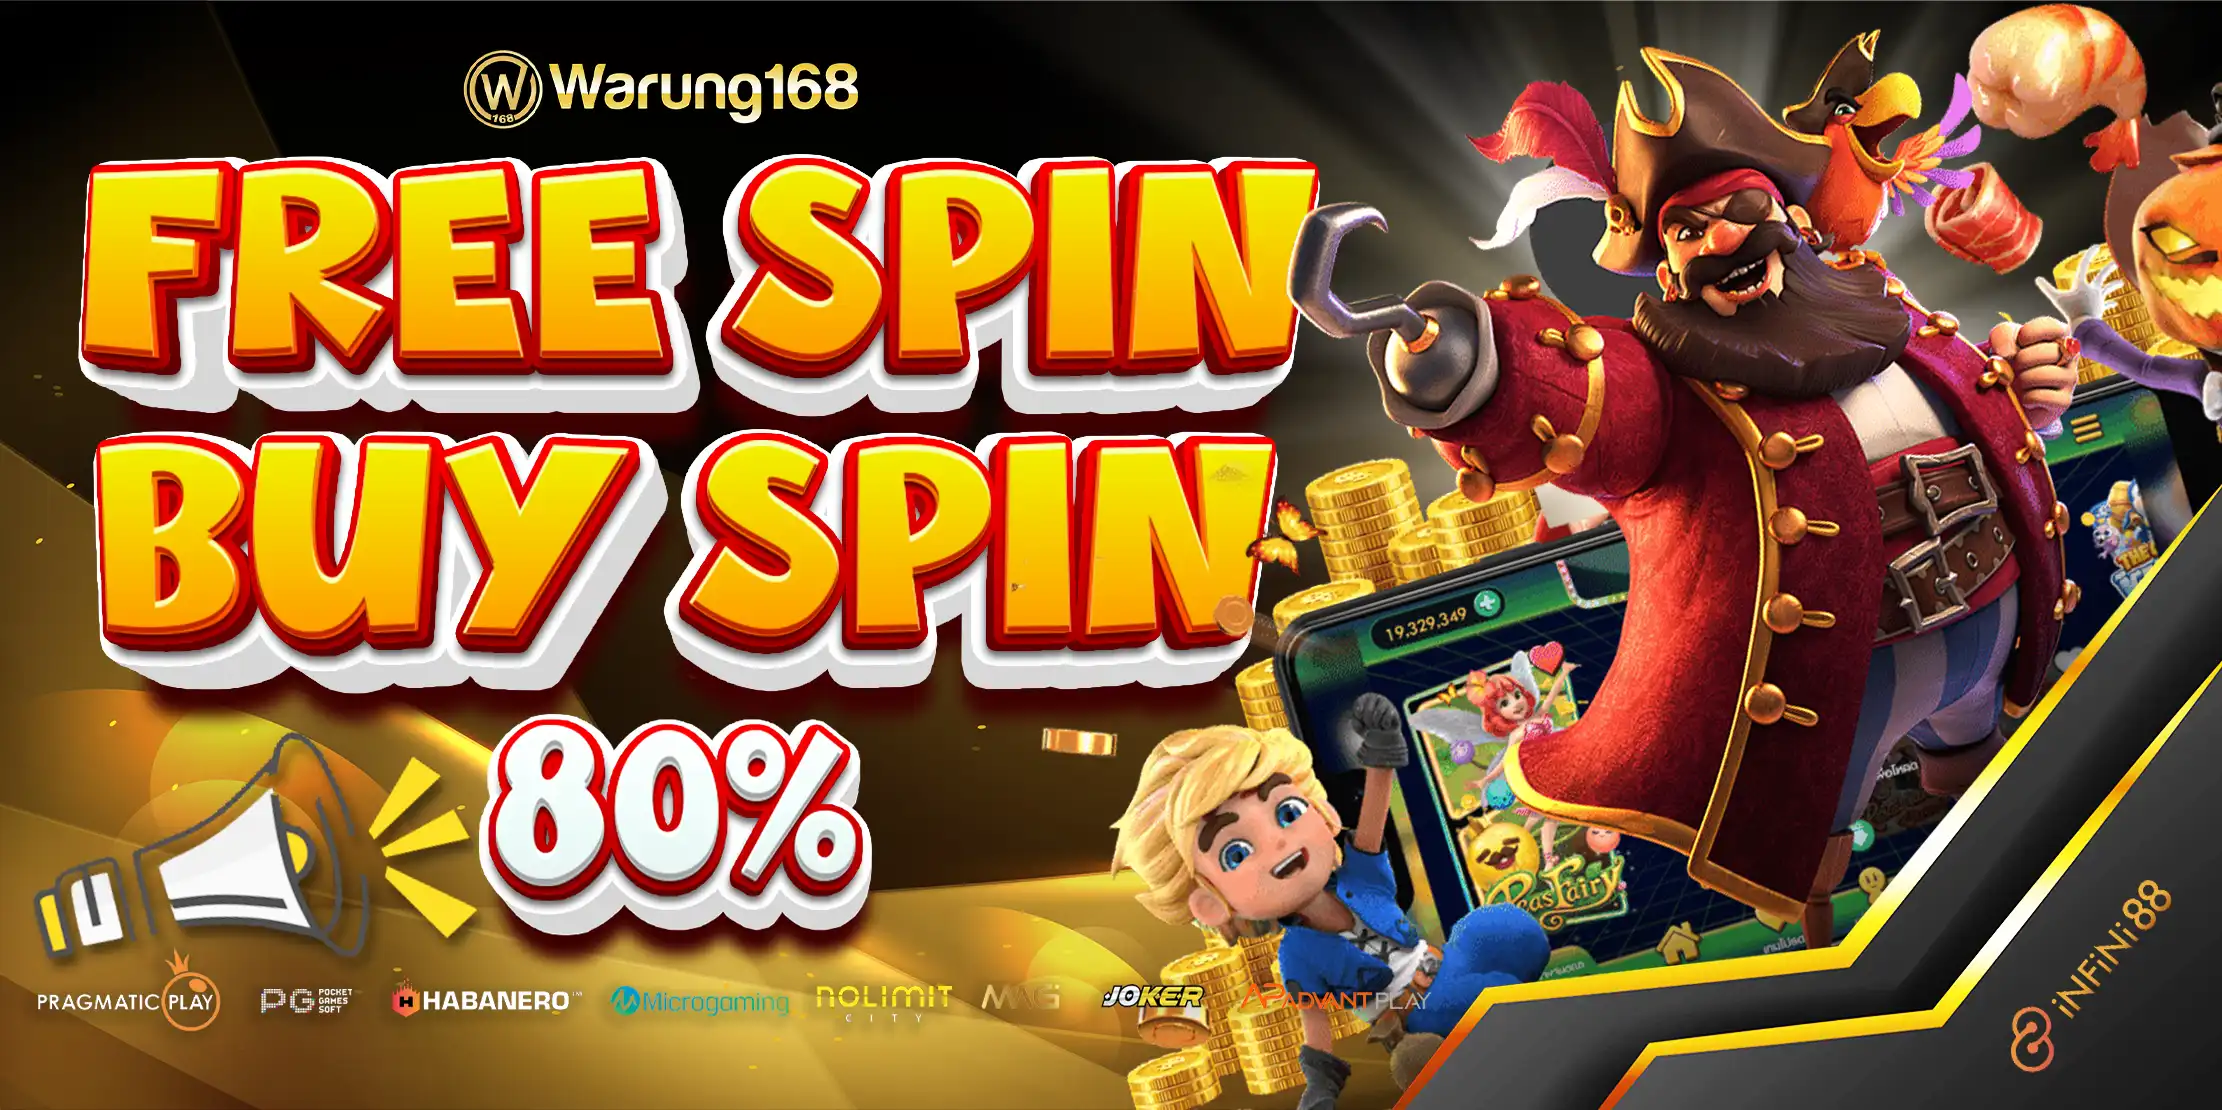 FREE SPIN BUY SPIN